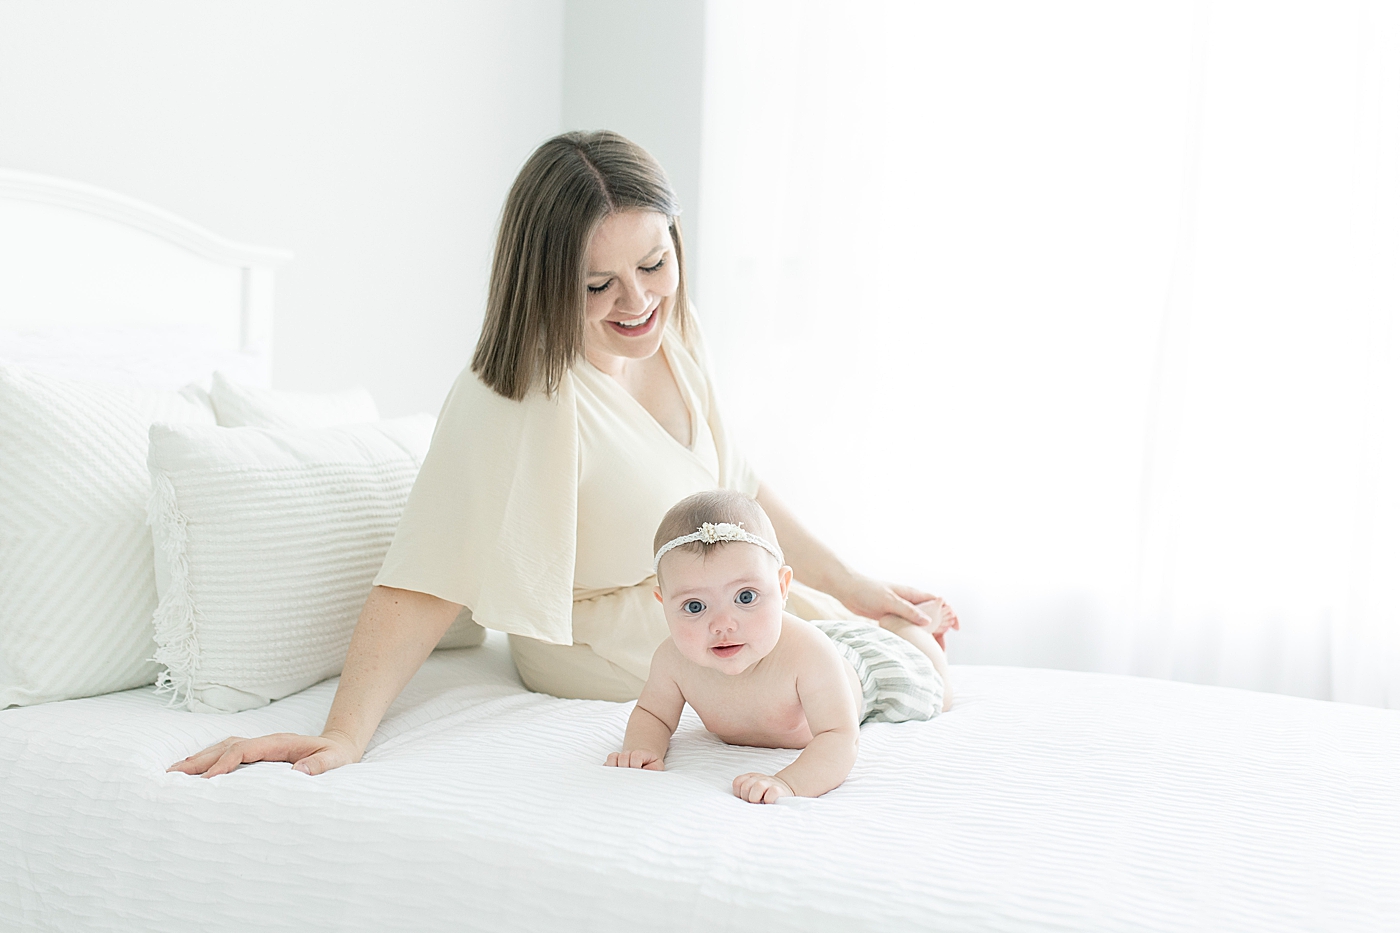 Baby girl and mom sitting on a bed during tummy time | Photo by Little Sunshine Photography